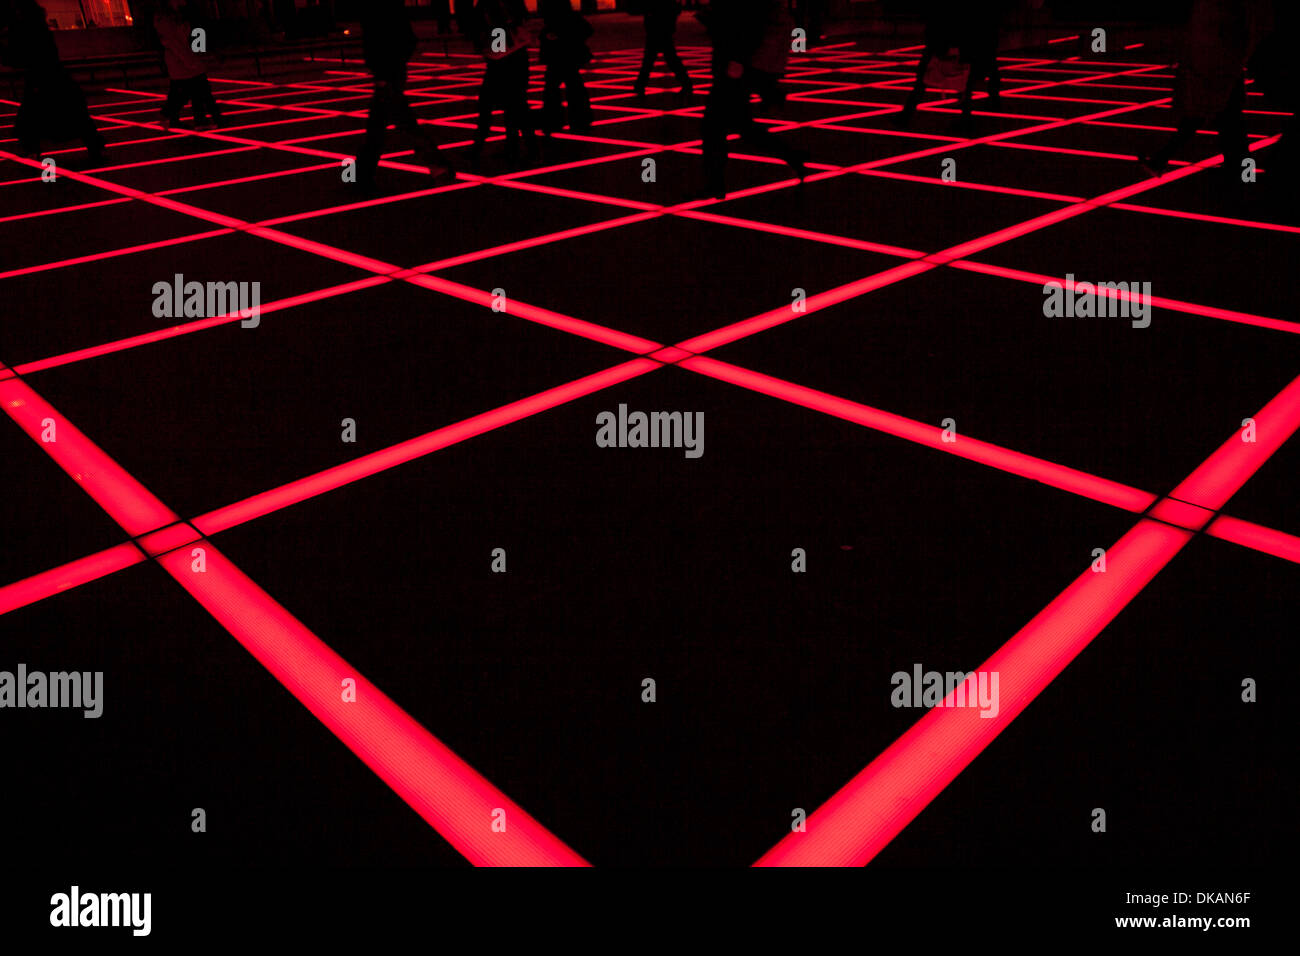 Red strip lighting in Finsbury Square London Stock Photo